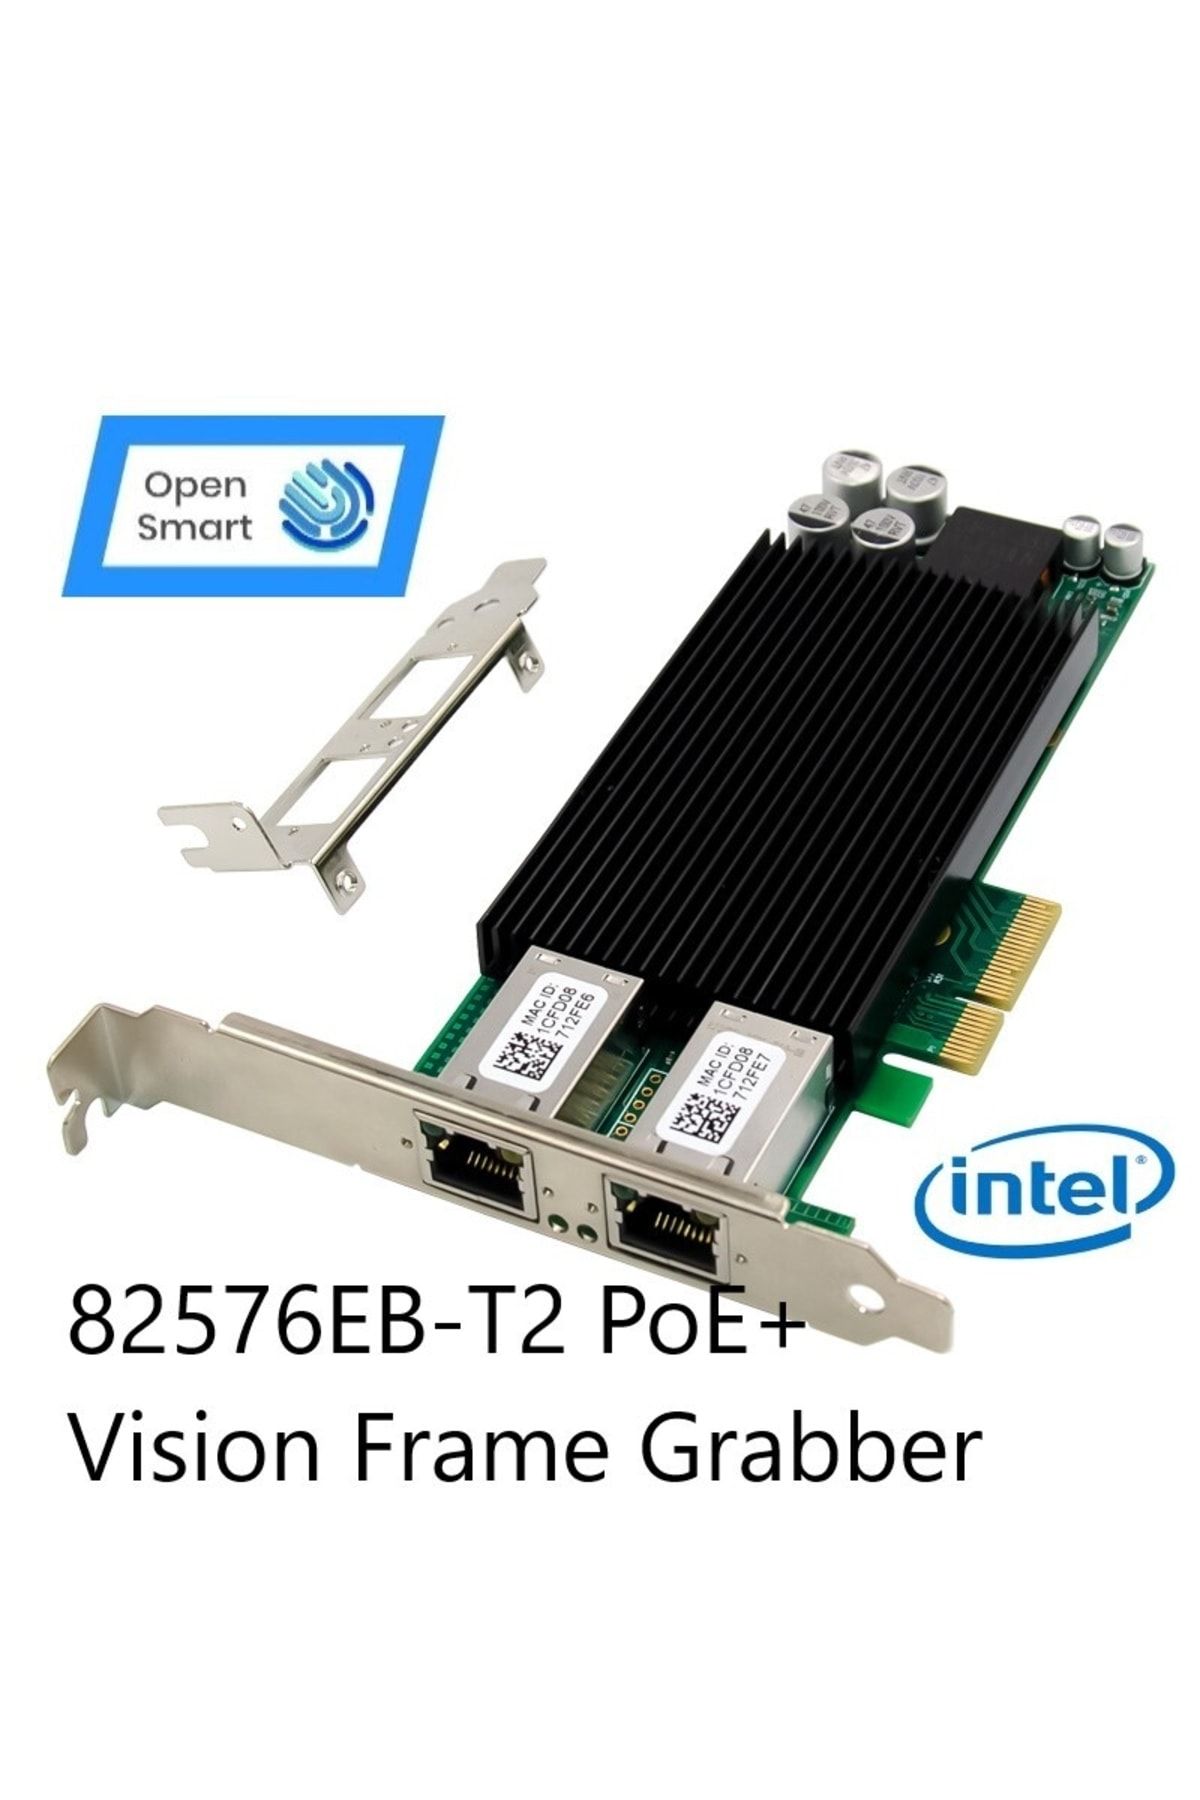 Open Smart Intel 82576eb Dual Port 1gbe Poe+ Vision Frame Grabber Nic Adapter - Ops7231nt